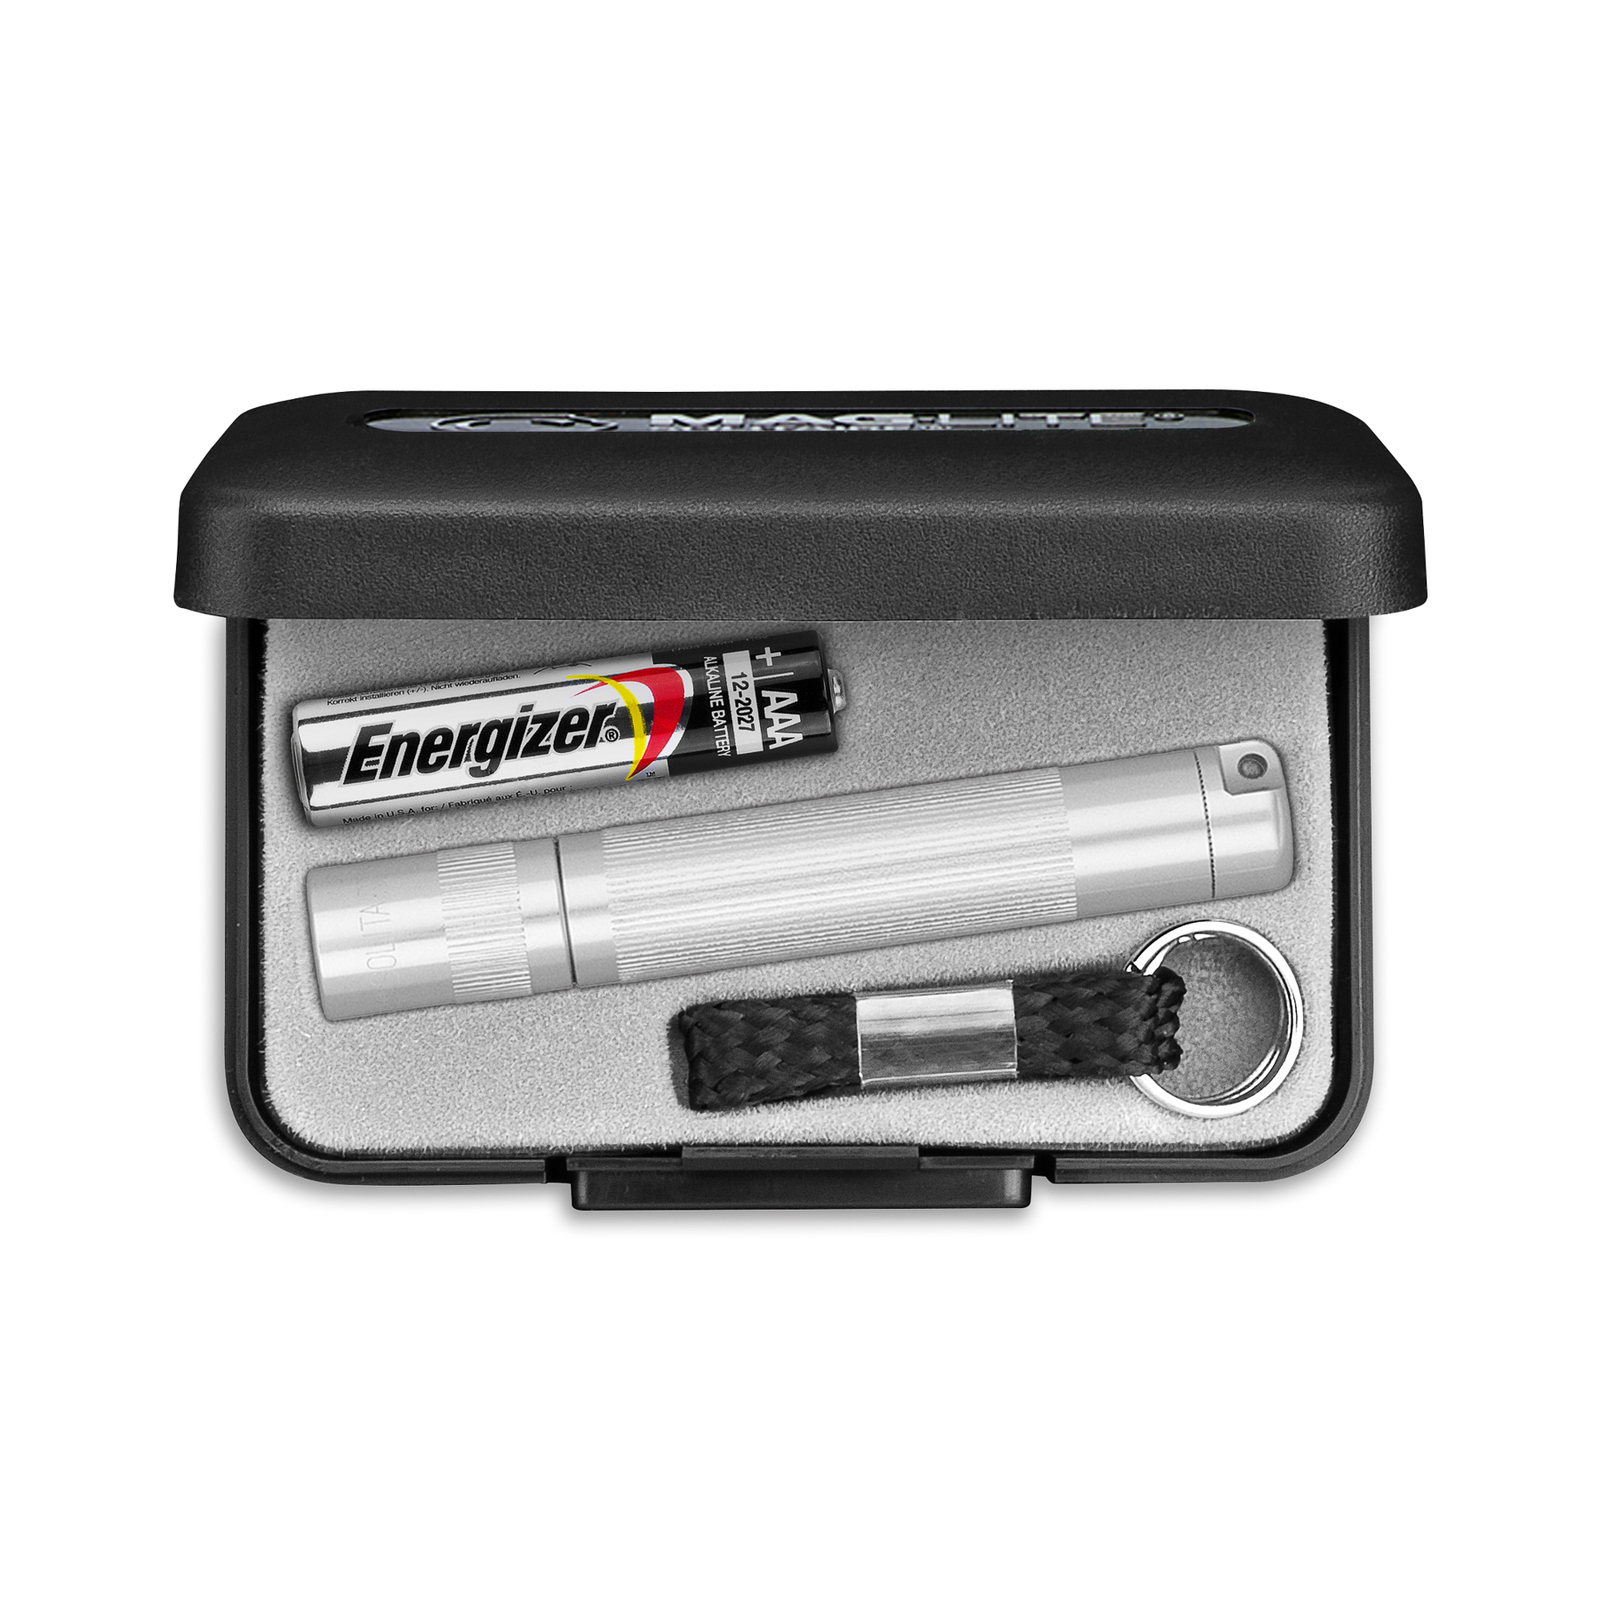 Maglite Xenon torch Solitaire 1-Cell AAA, Boxer, silver